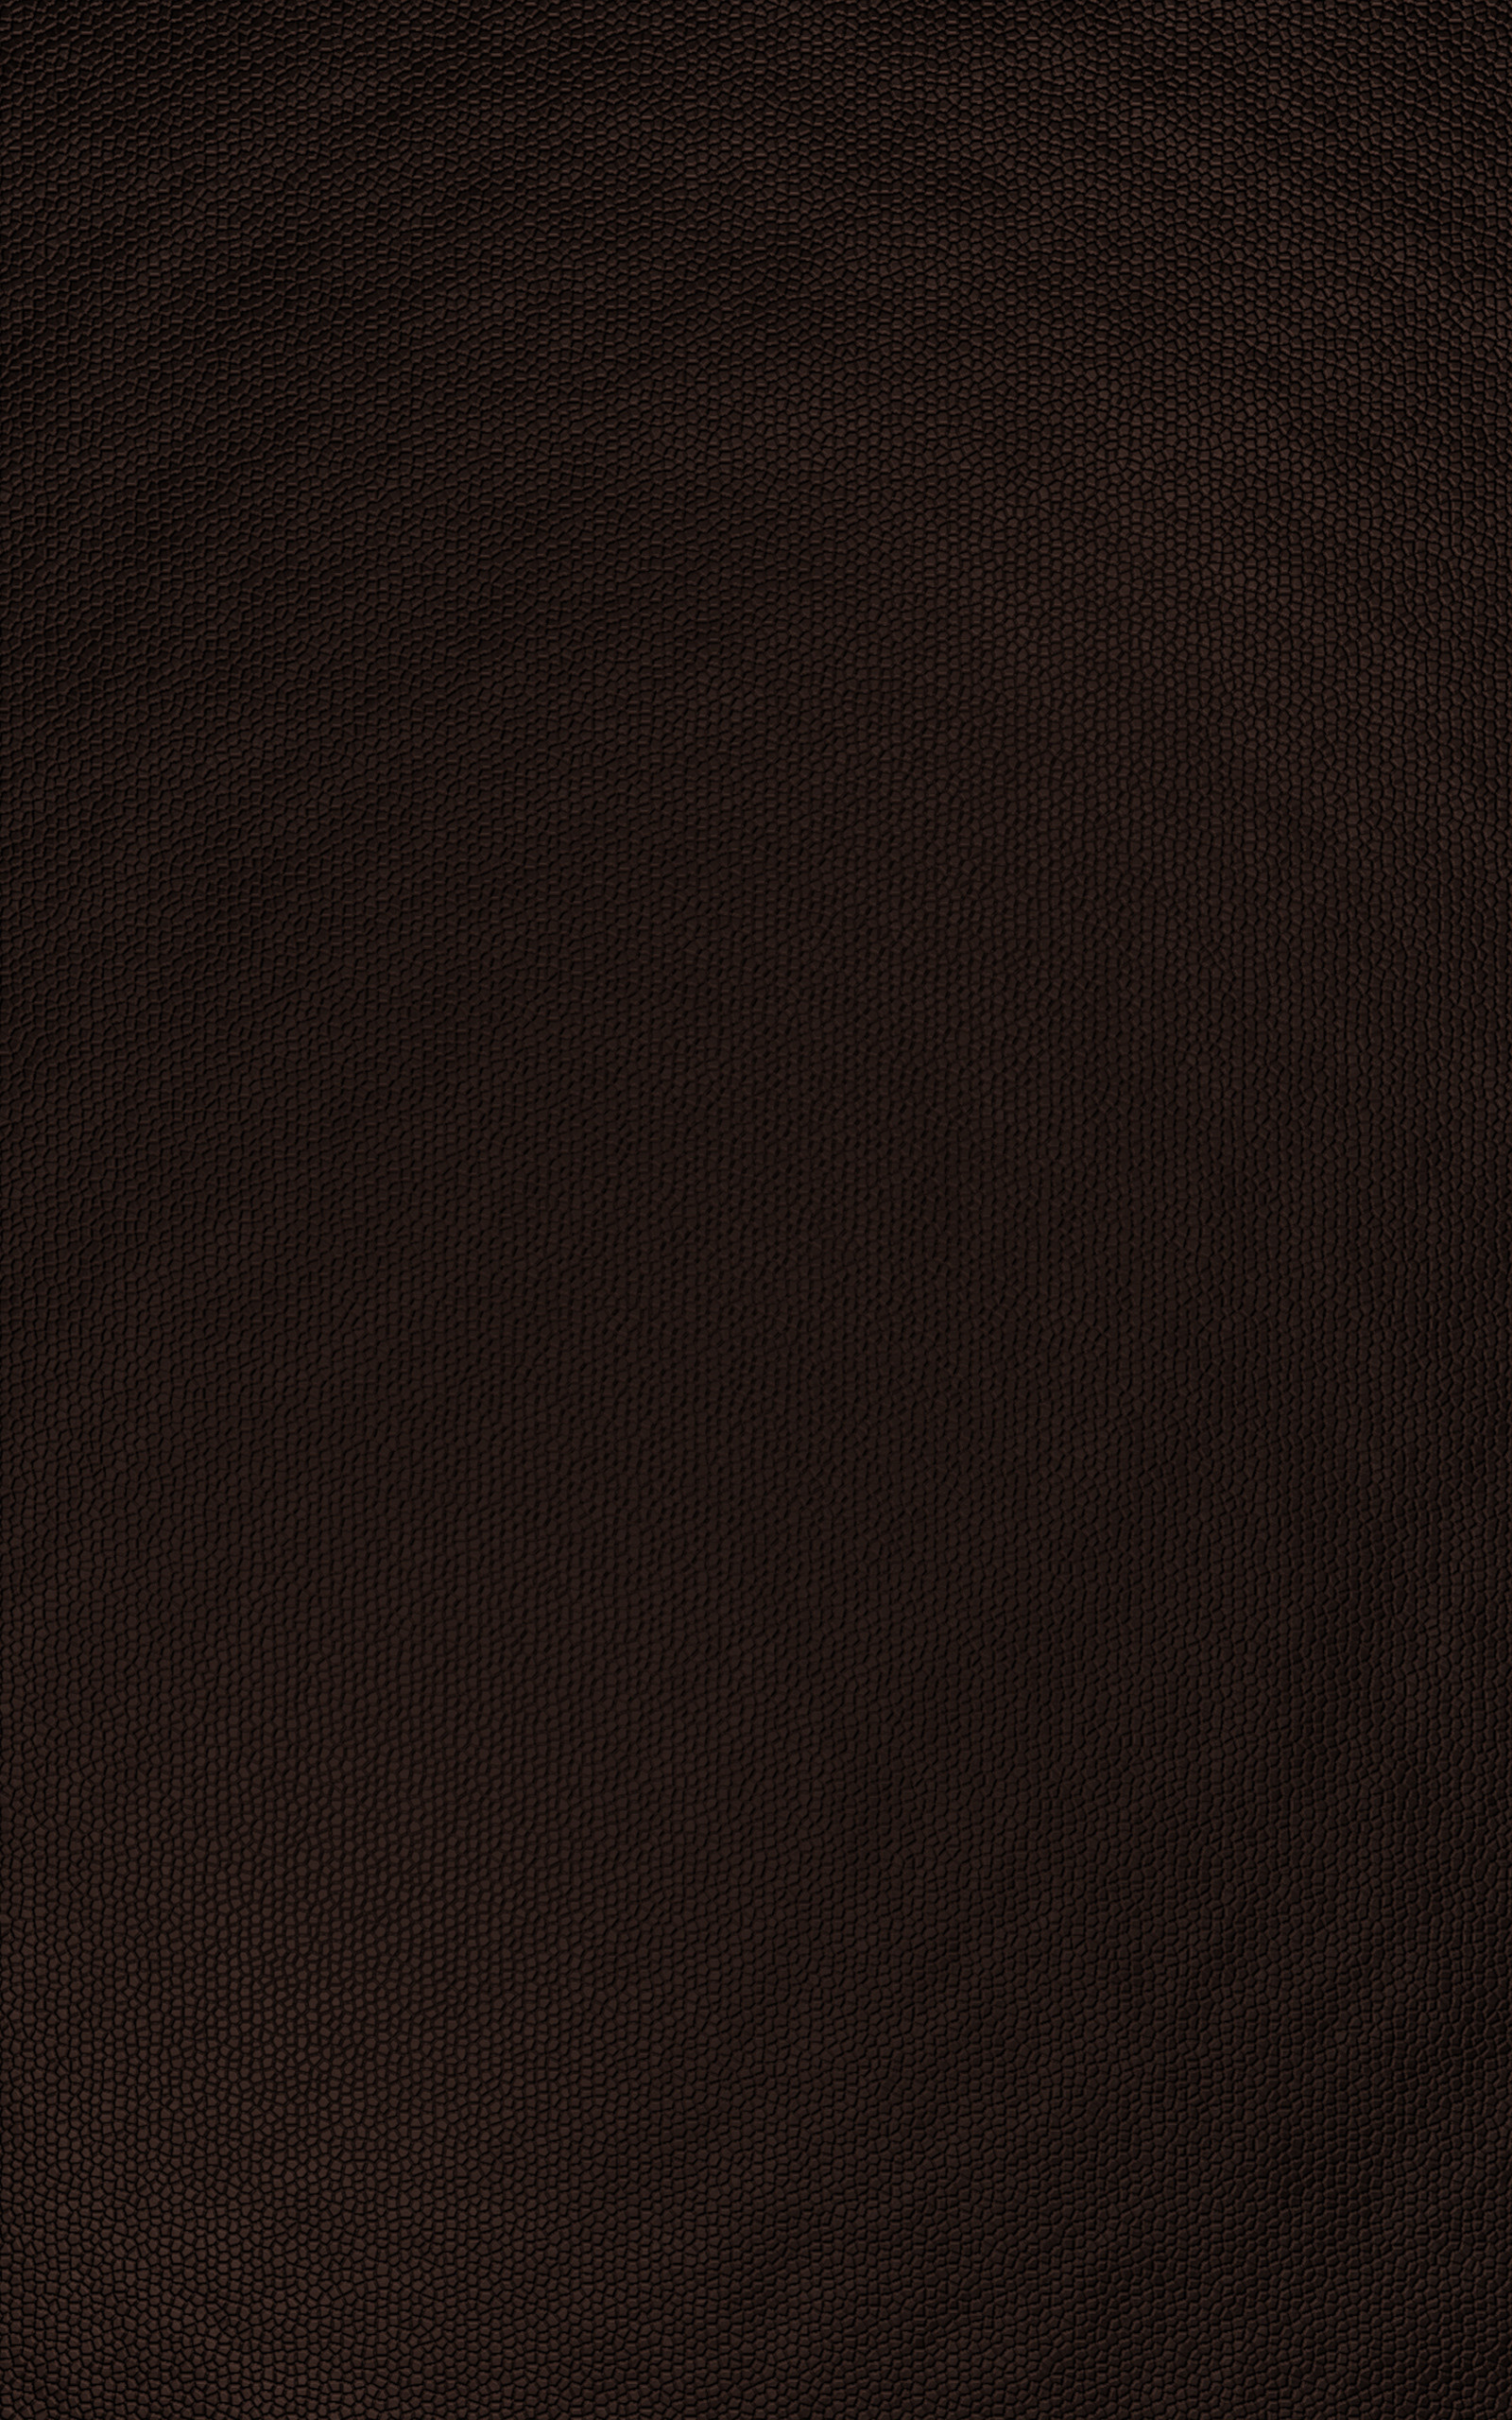 1600x2560 Brown leather Wallpaper